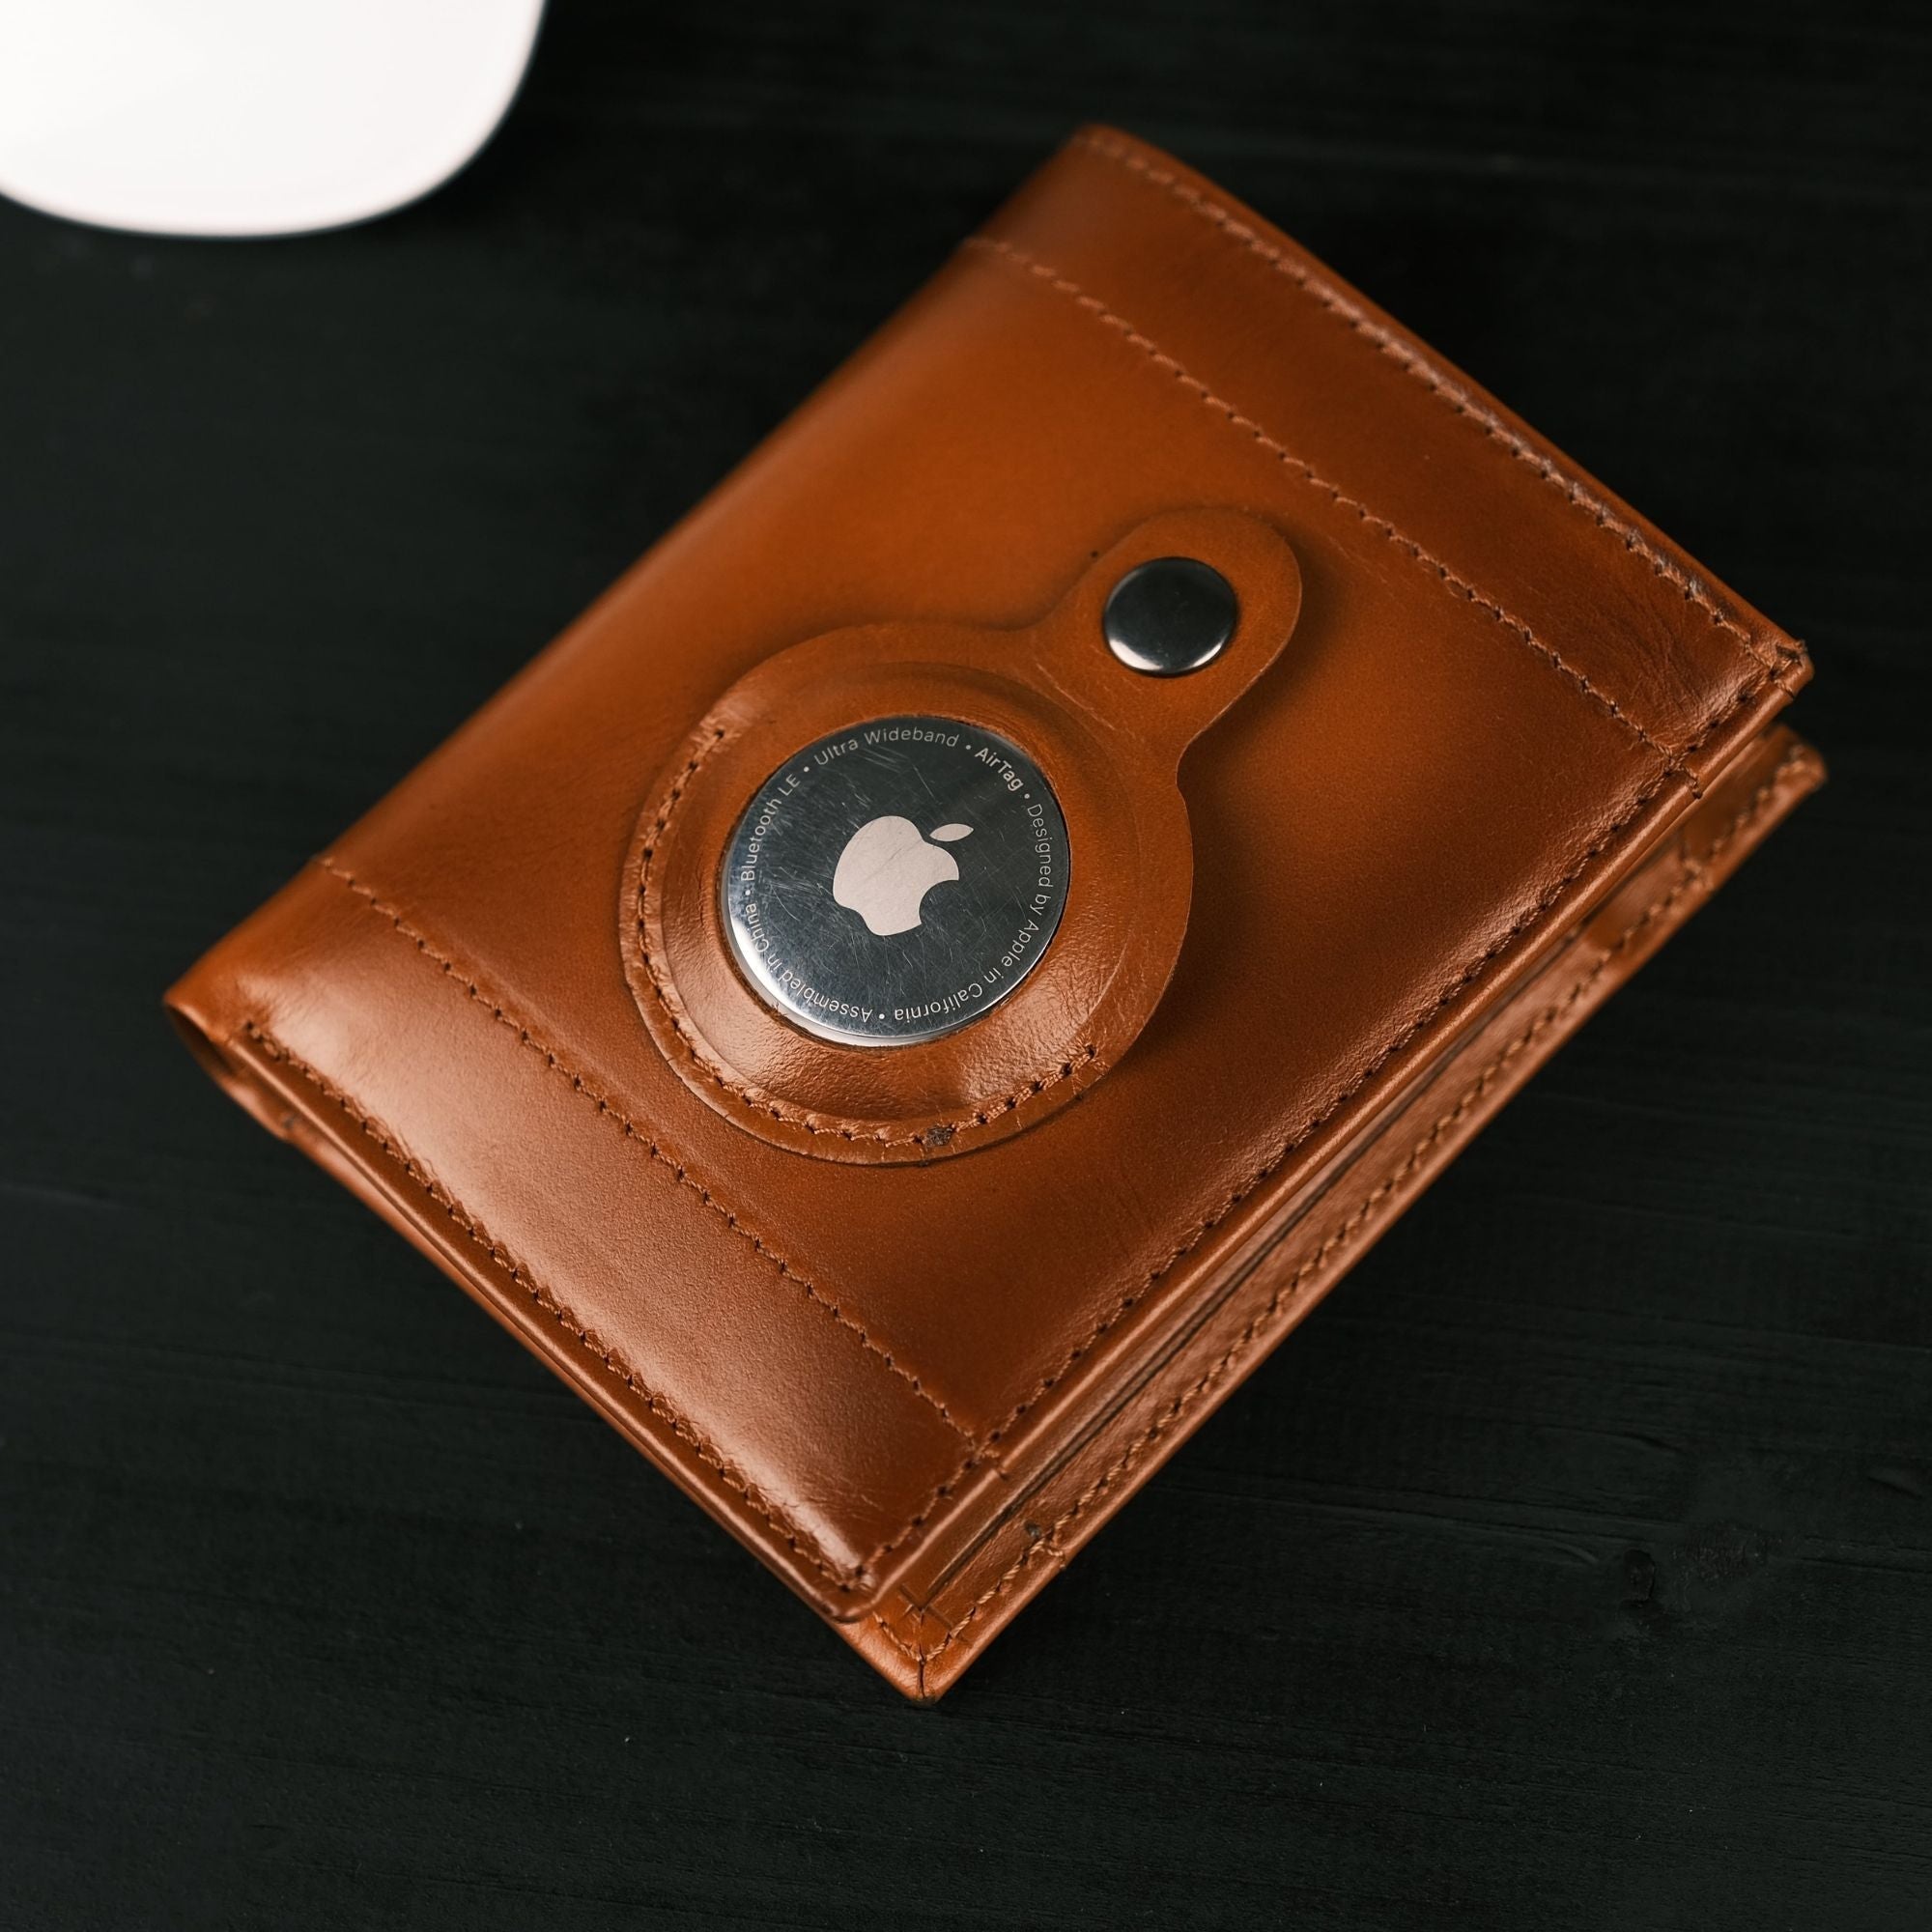 Glendo Apple AirTag Slot Leather Wallet, Handcrafted, Unisex Tan